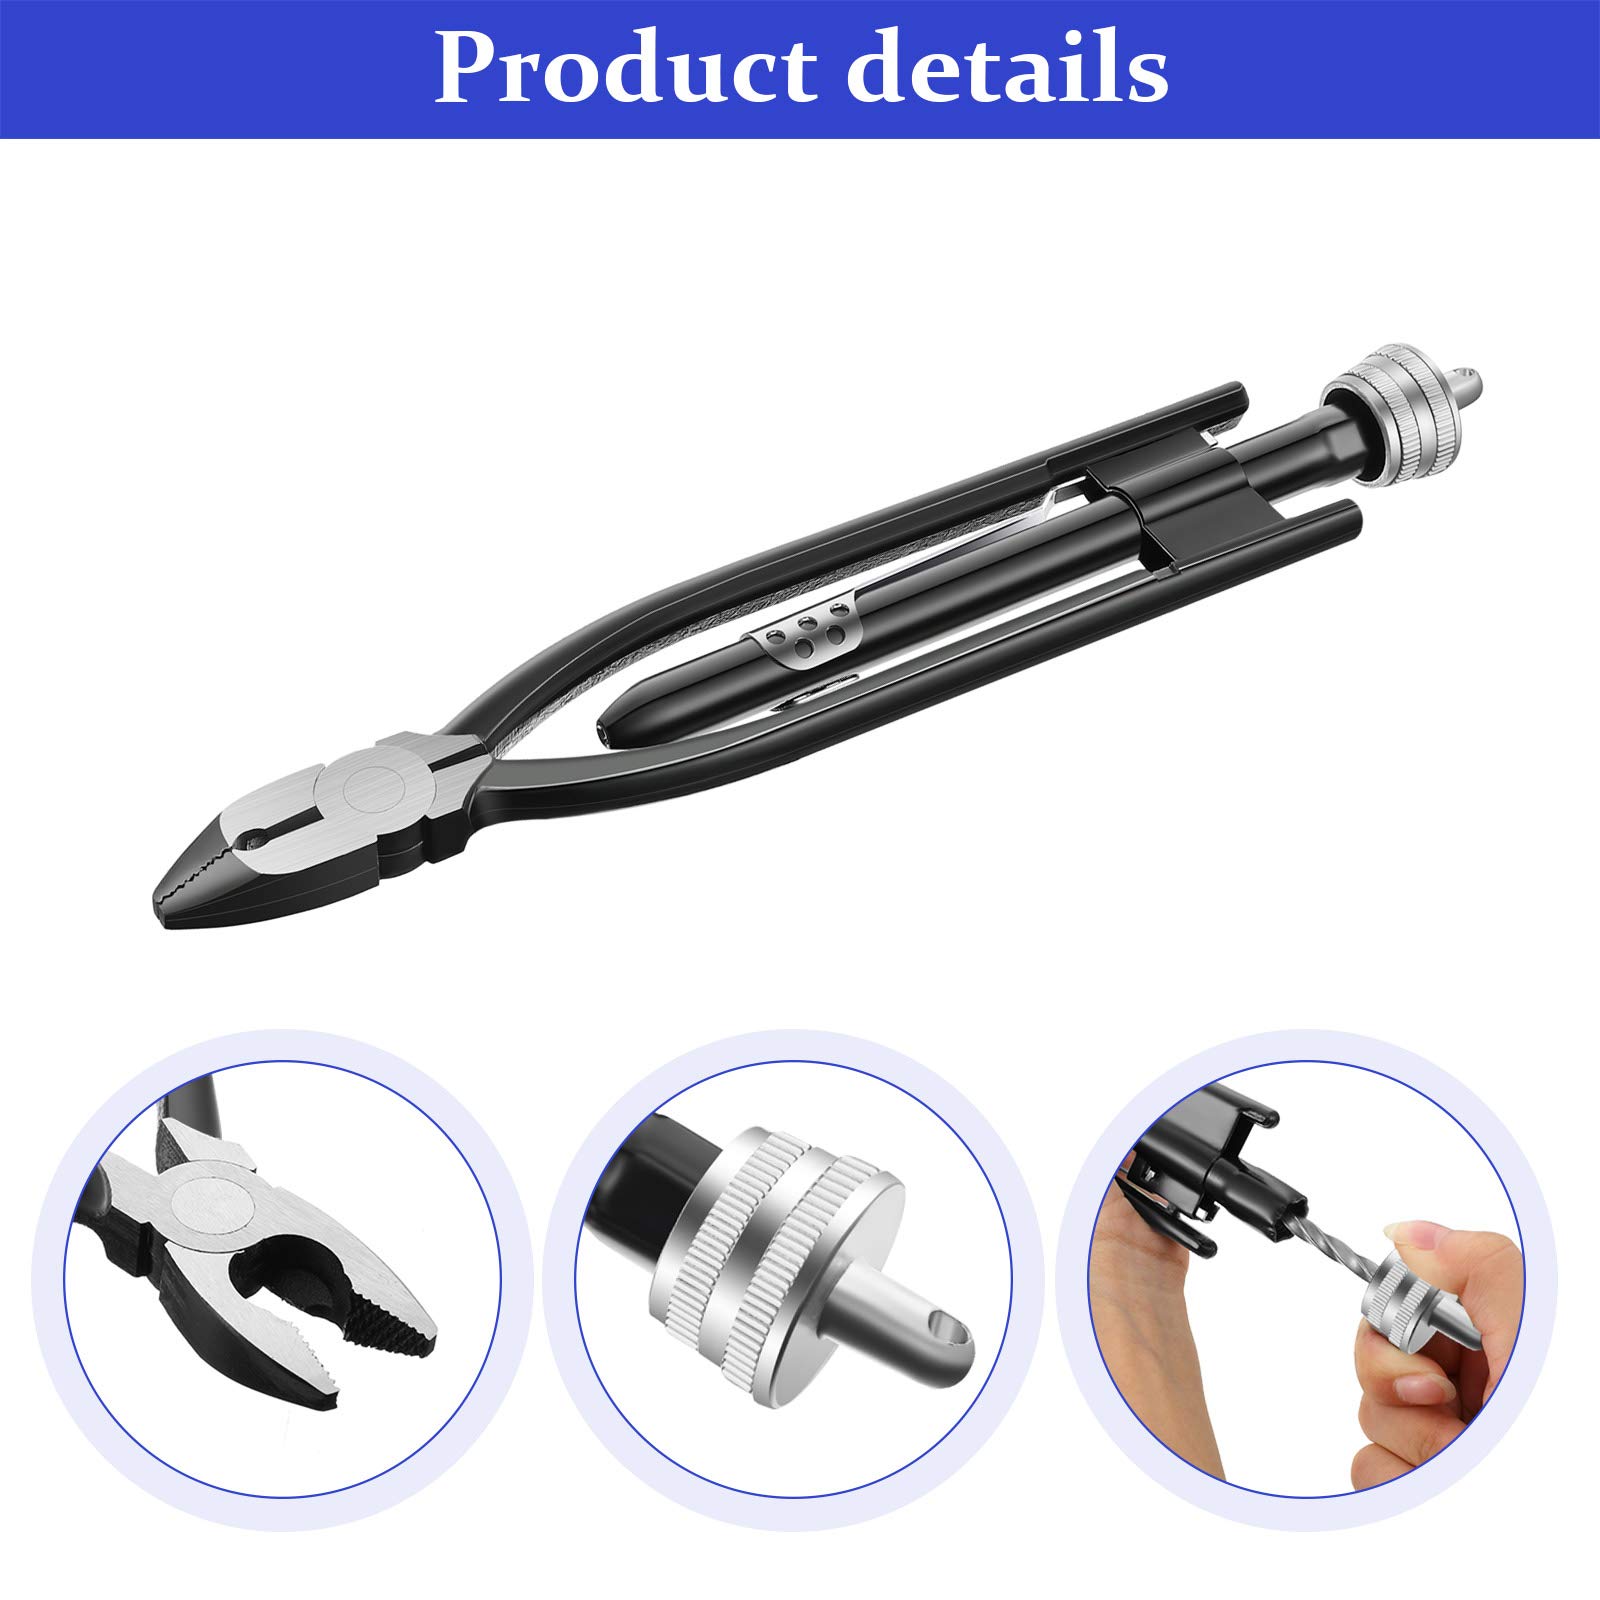 9 Inch Safety Wire Twisting Pliers, Aircraft Wire Twisting Tool with 10 Meters 0.5 mm Wire, Automatic Metal Lock Twister for Aircraft Auto Industry